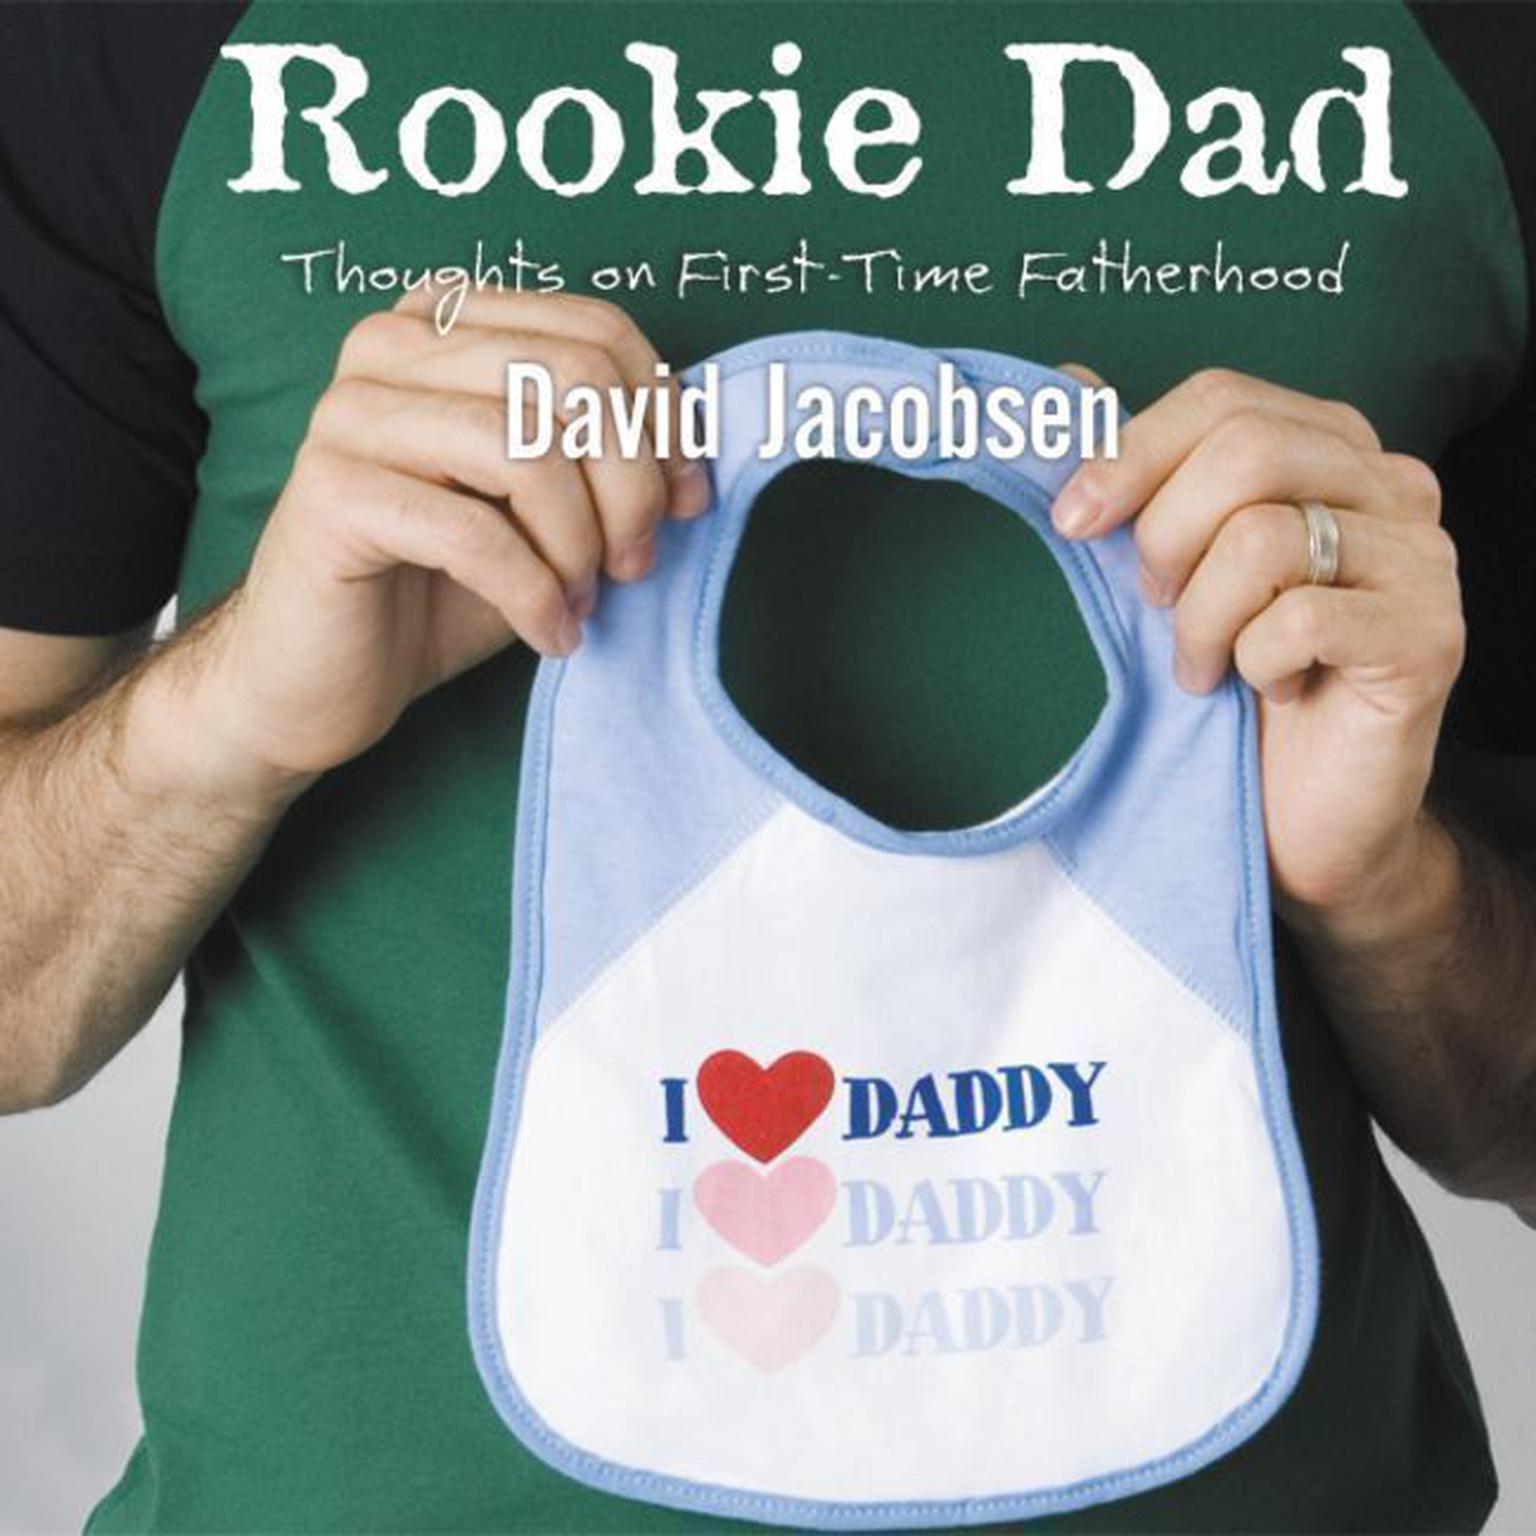 Rookie Dad: Thoughts on First-Time Fatherhood Audiobook, by David Jacobsen